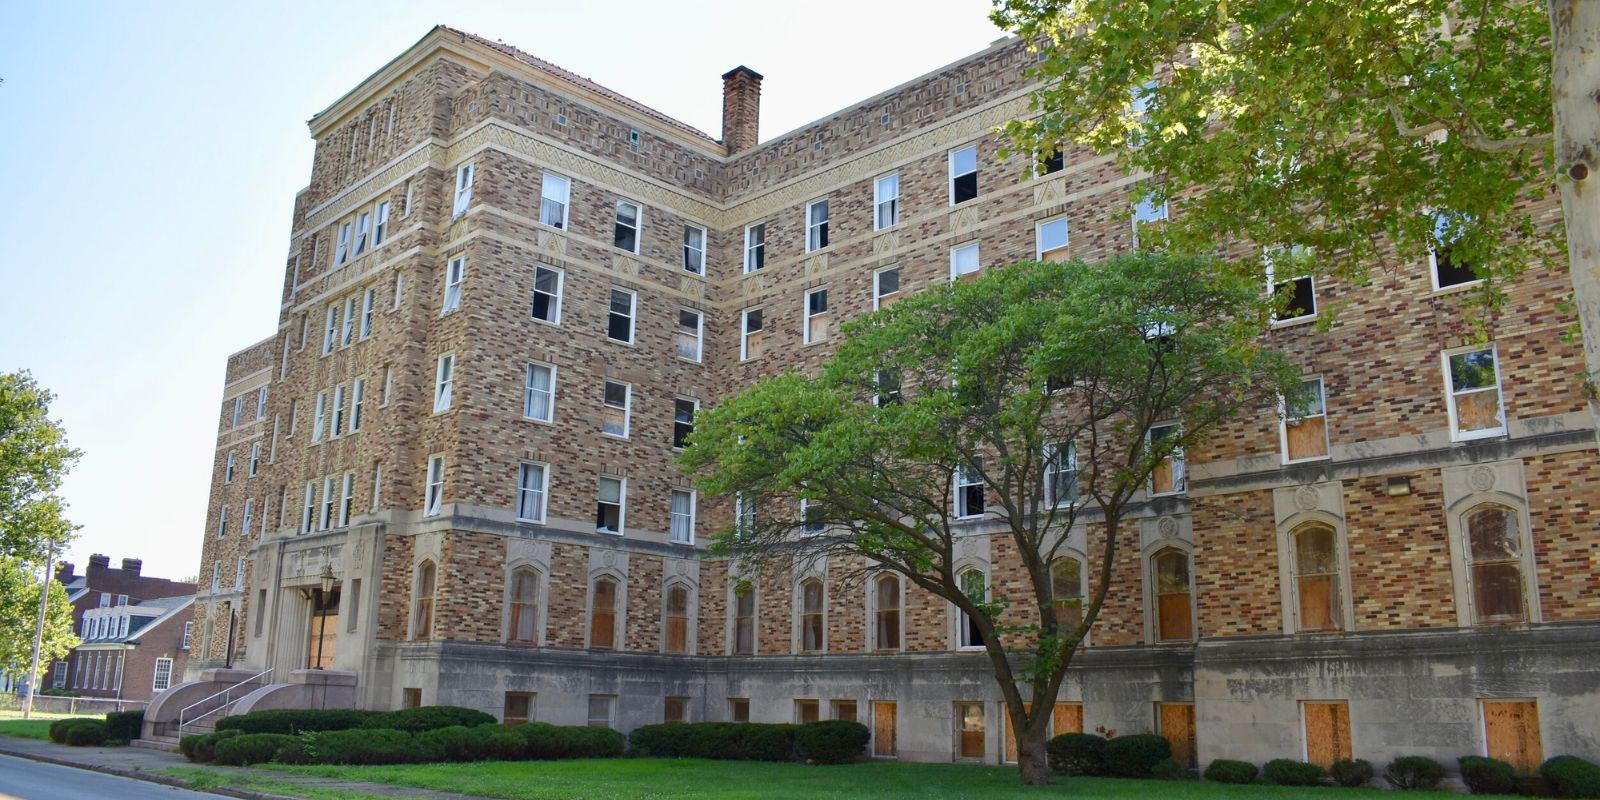 Located in The Ville, Sumner High School was the first school west of the Mississippi River to provide secondary education for Black students.